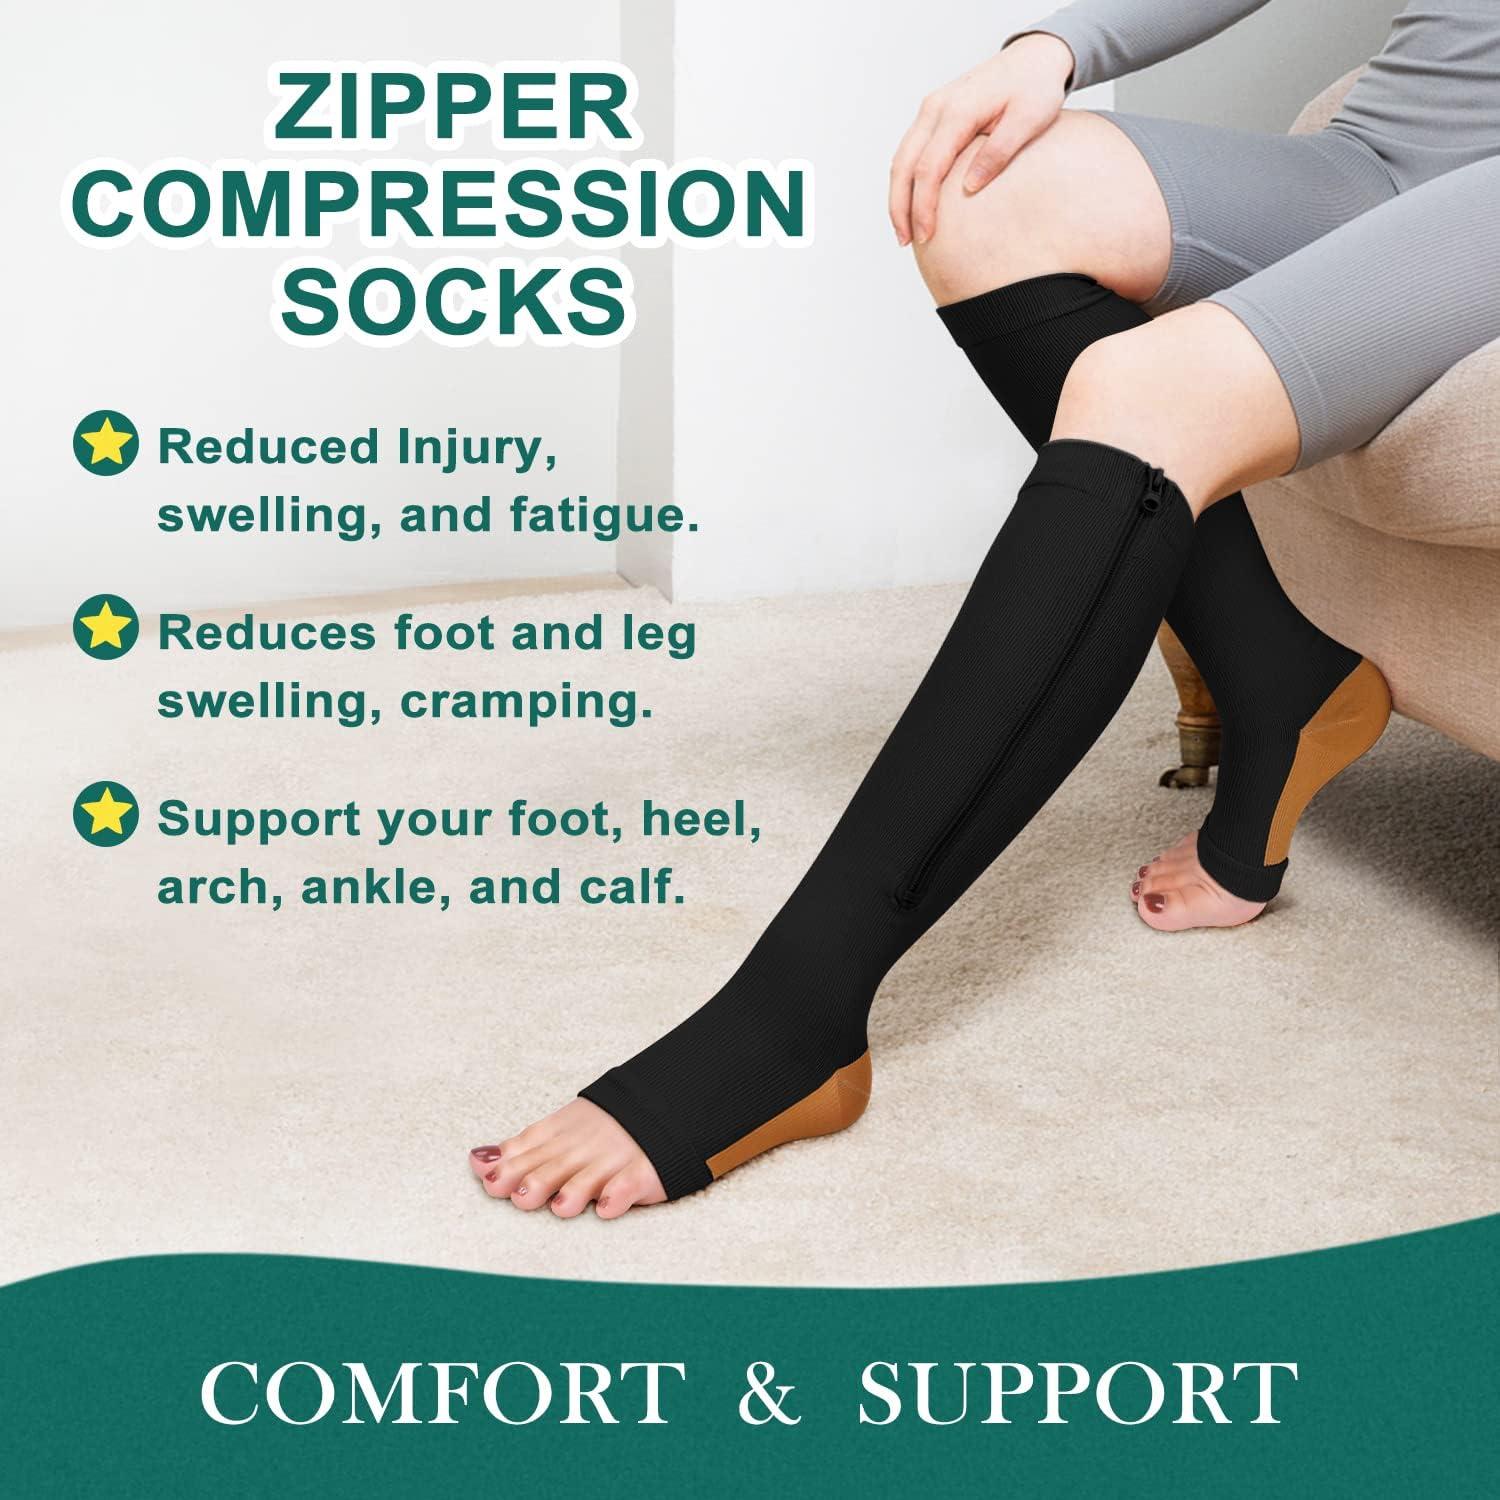 2 Pairs Copper Zipper Compression Socks 15-20mmgh-Calf Knee High Open Toe Support  Stocking Compression Stocking 01-copper Black Large-X-Large